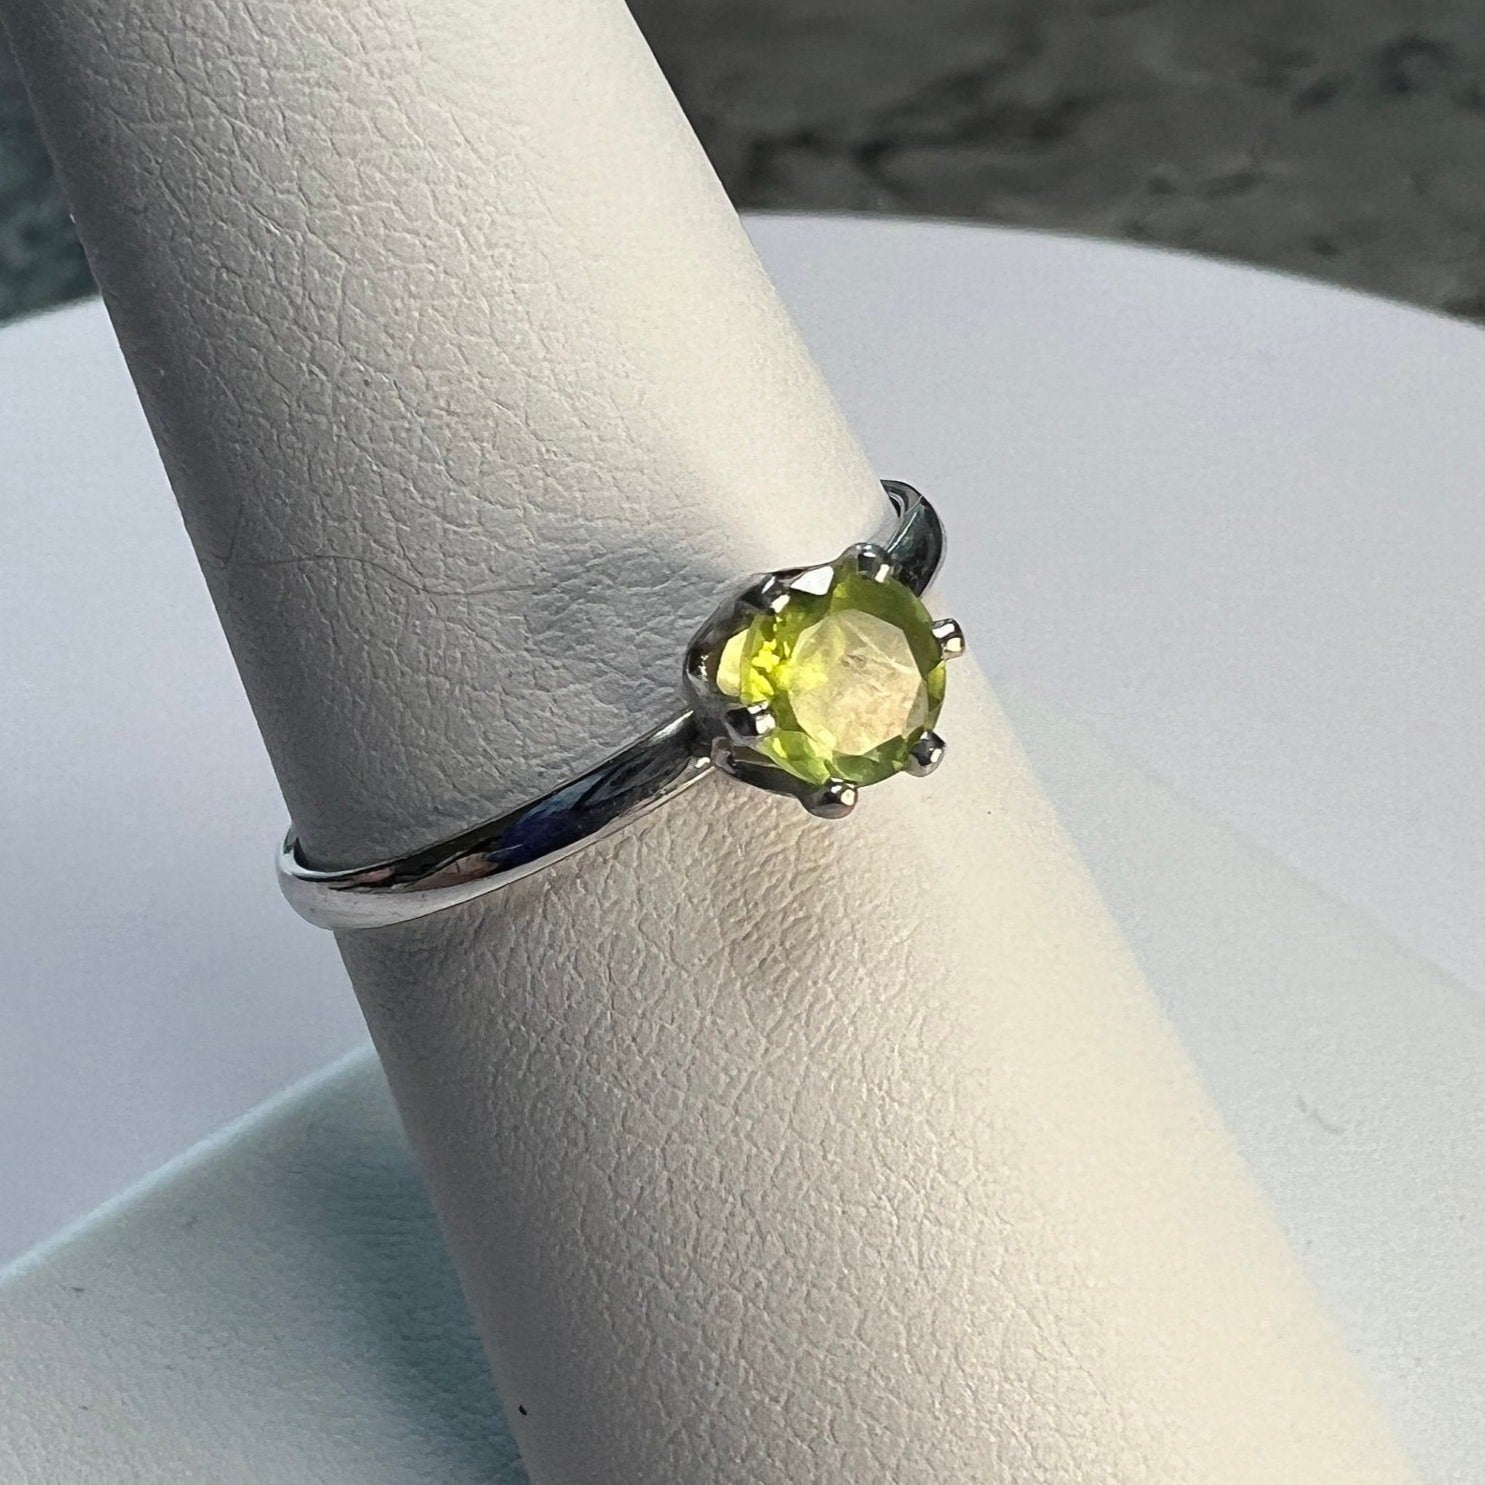 0.5 carat Peridot Solitaire Ring - (August Birthstone)